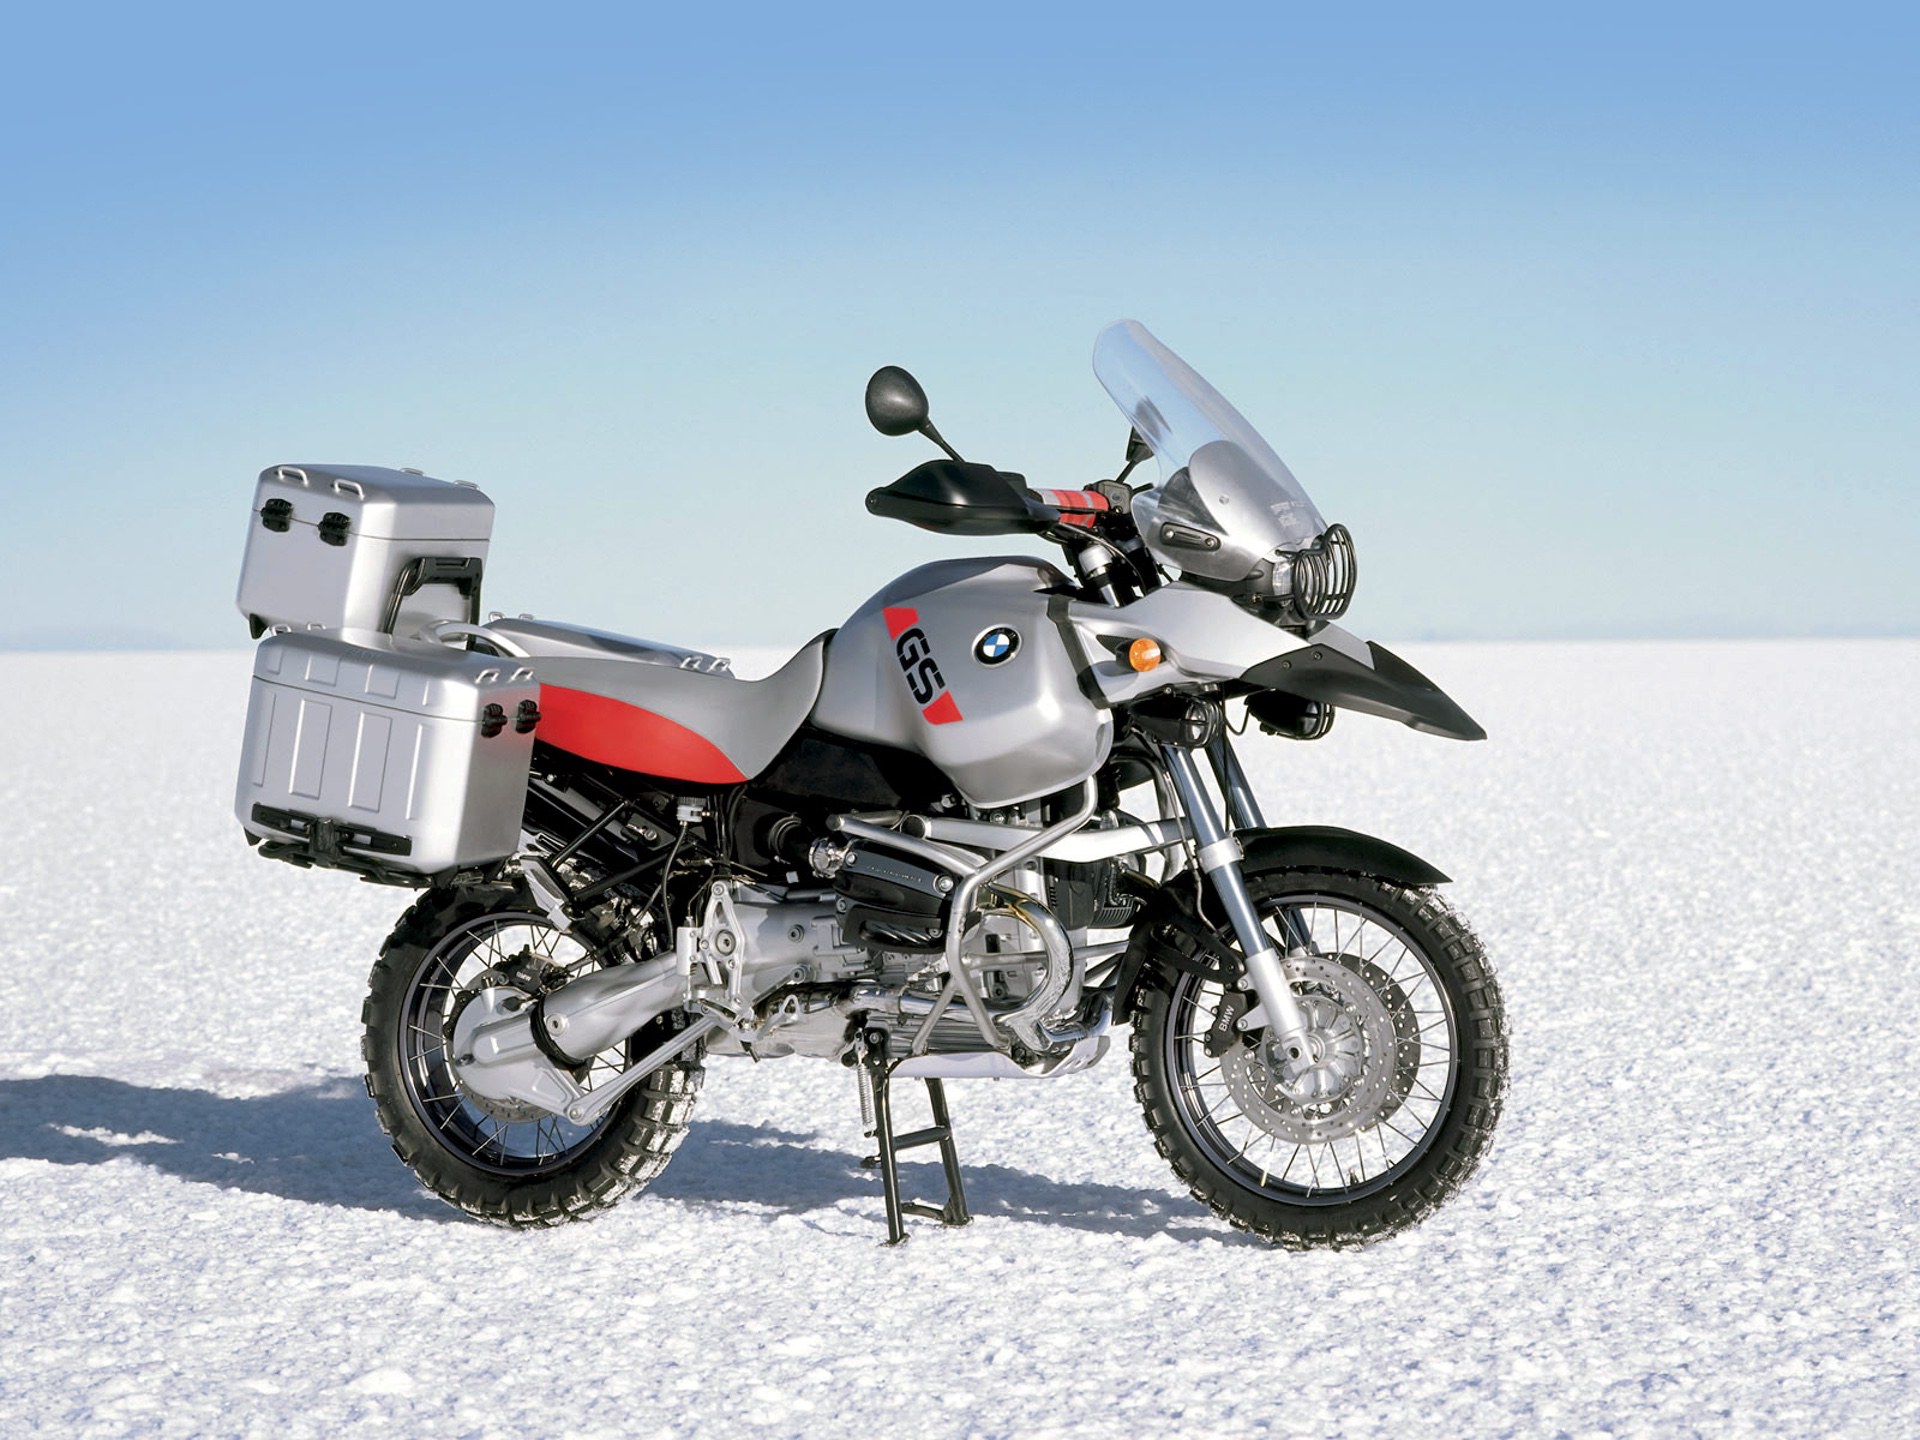 2001 BMW R 1150 GS Adventure motorcycle